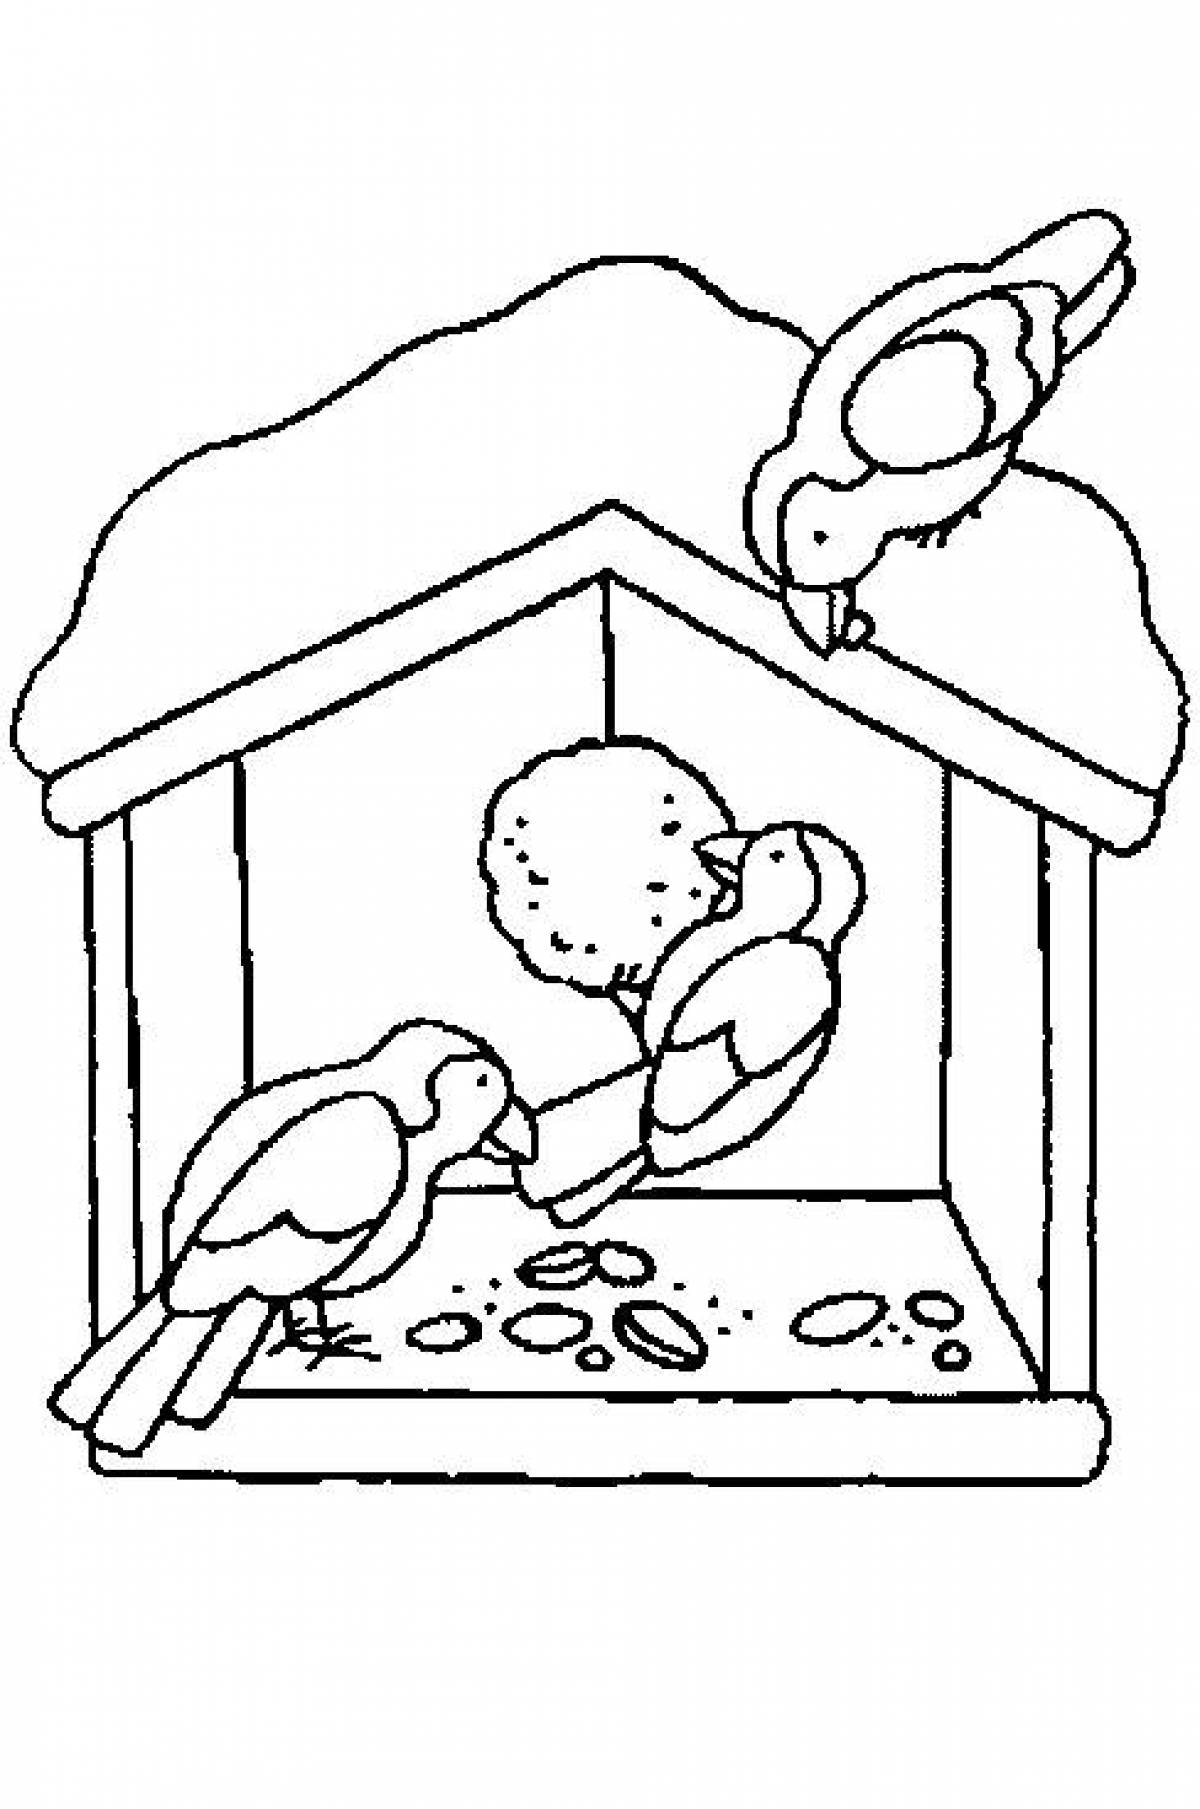 Radiant feeder coloring page